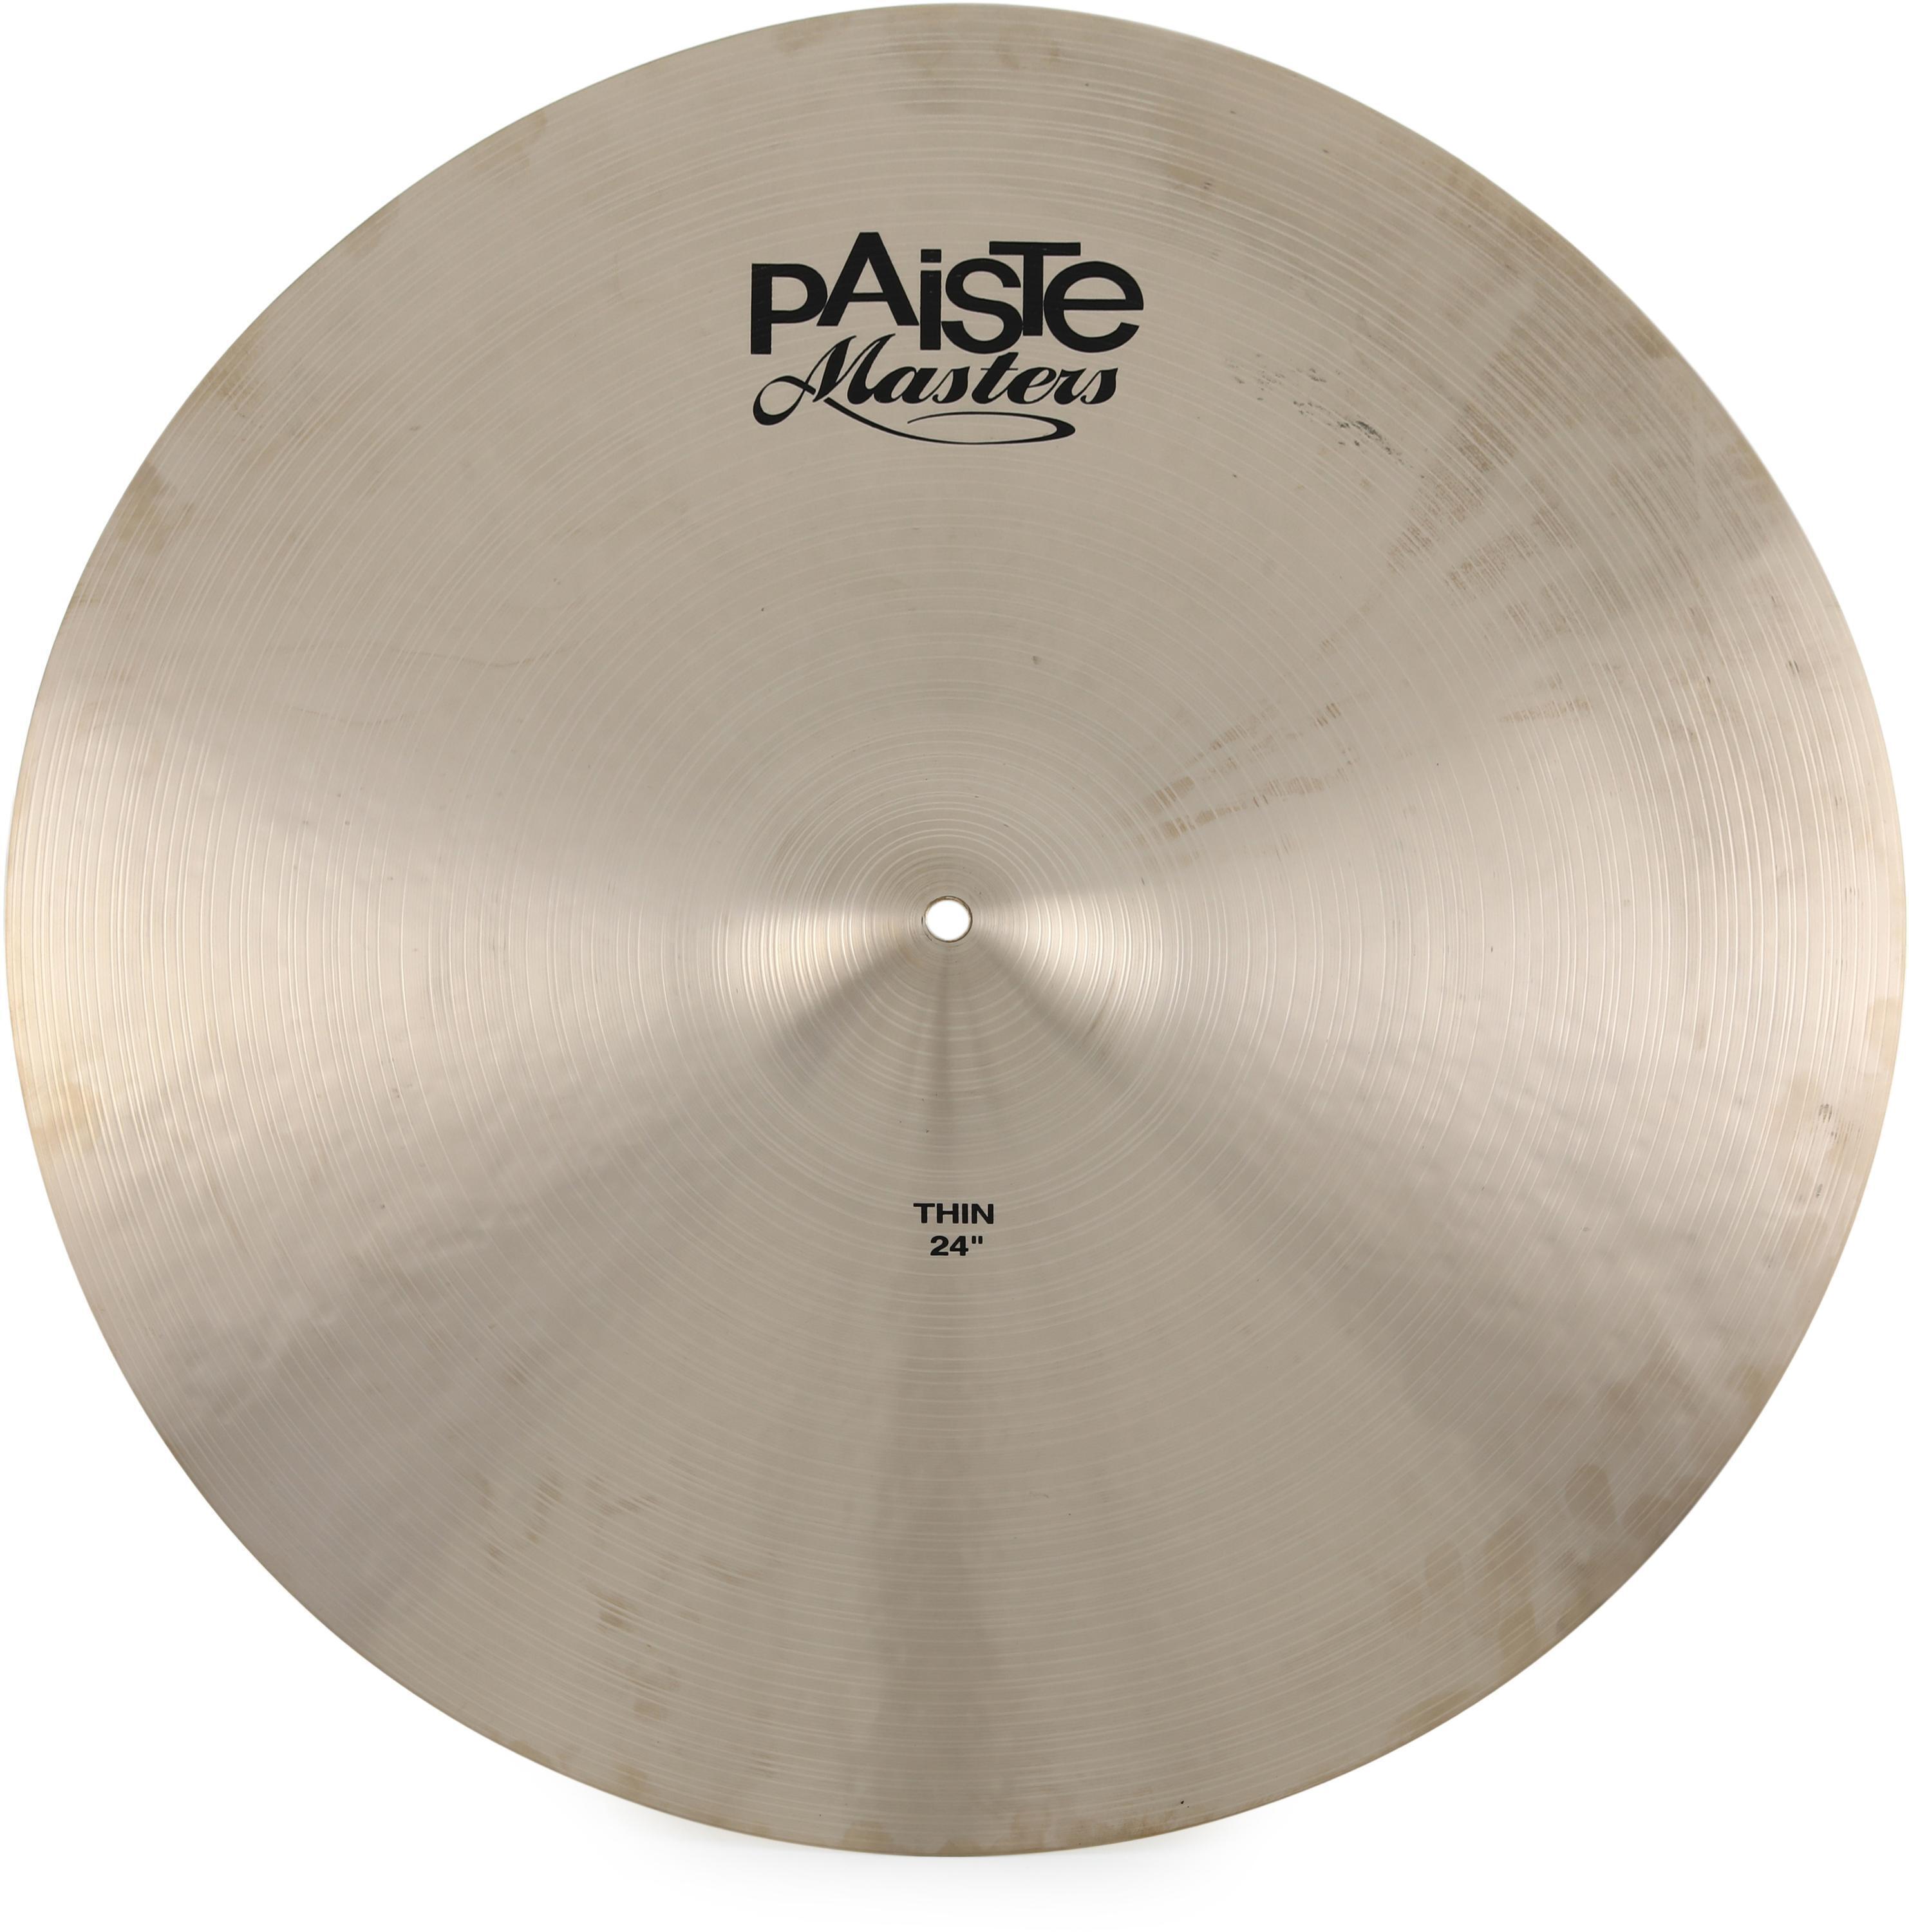 Paiste Masters Thin Ride Cymbal - 24-inch